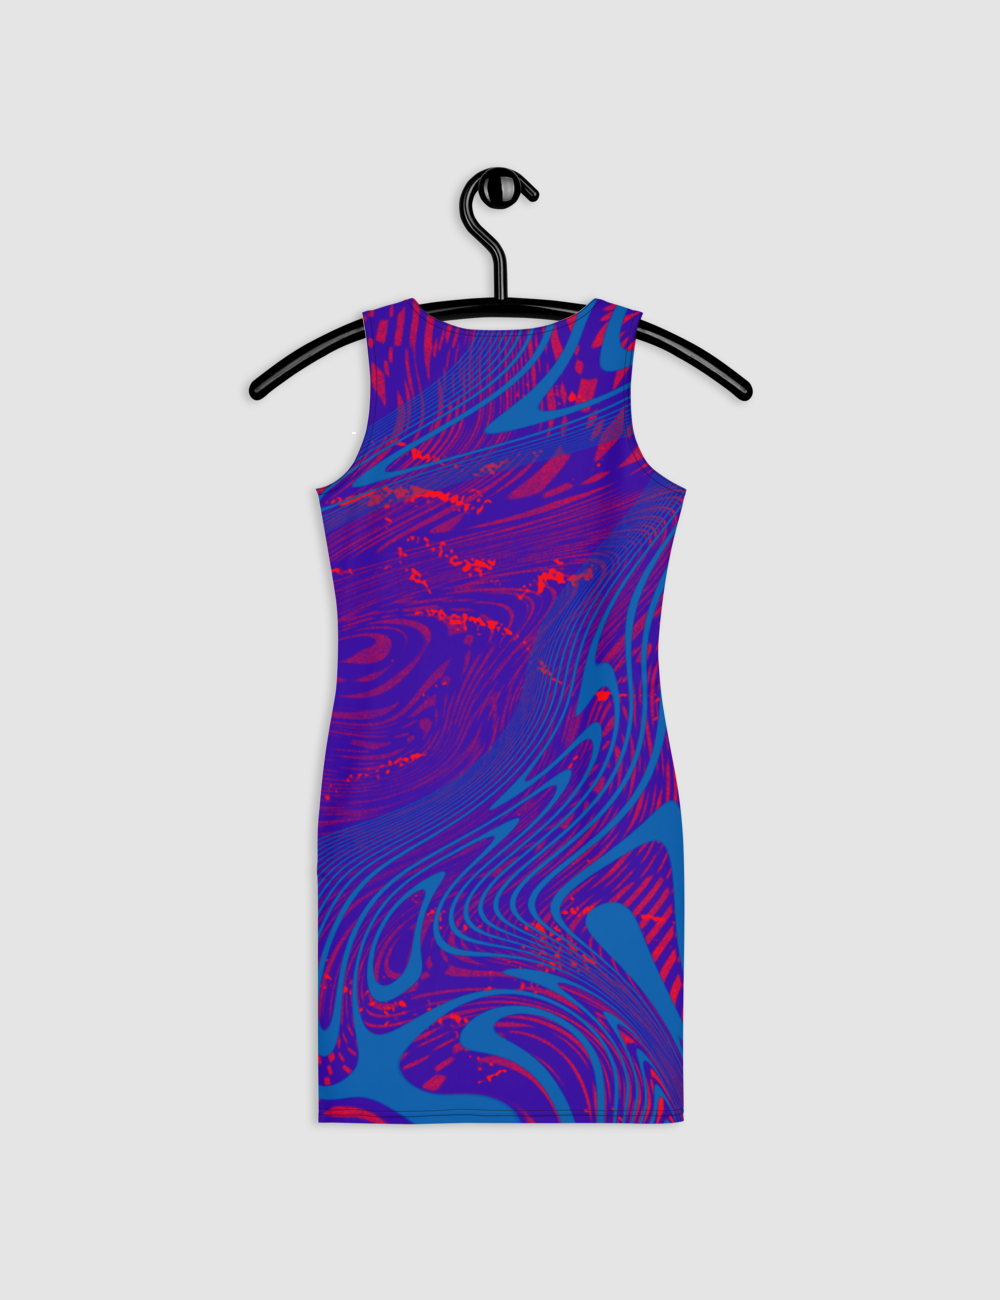 Psychedelic Liquid Coral Abstract | Women's Sleeveless Fitted Sublimated Dress OniTakai